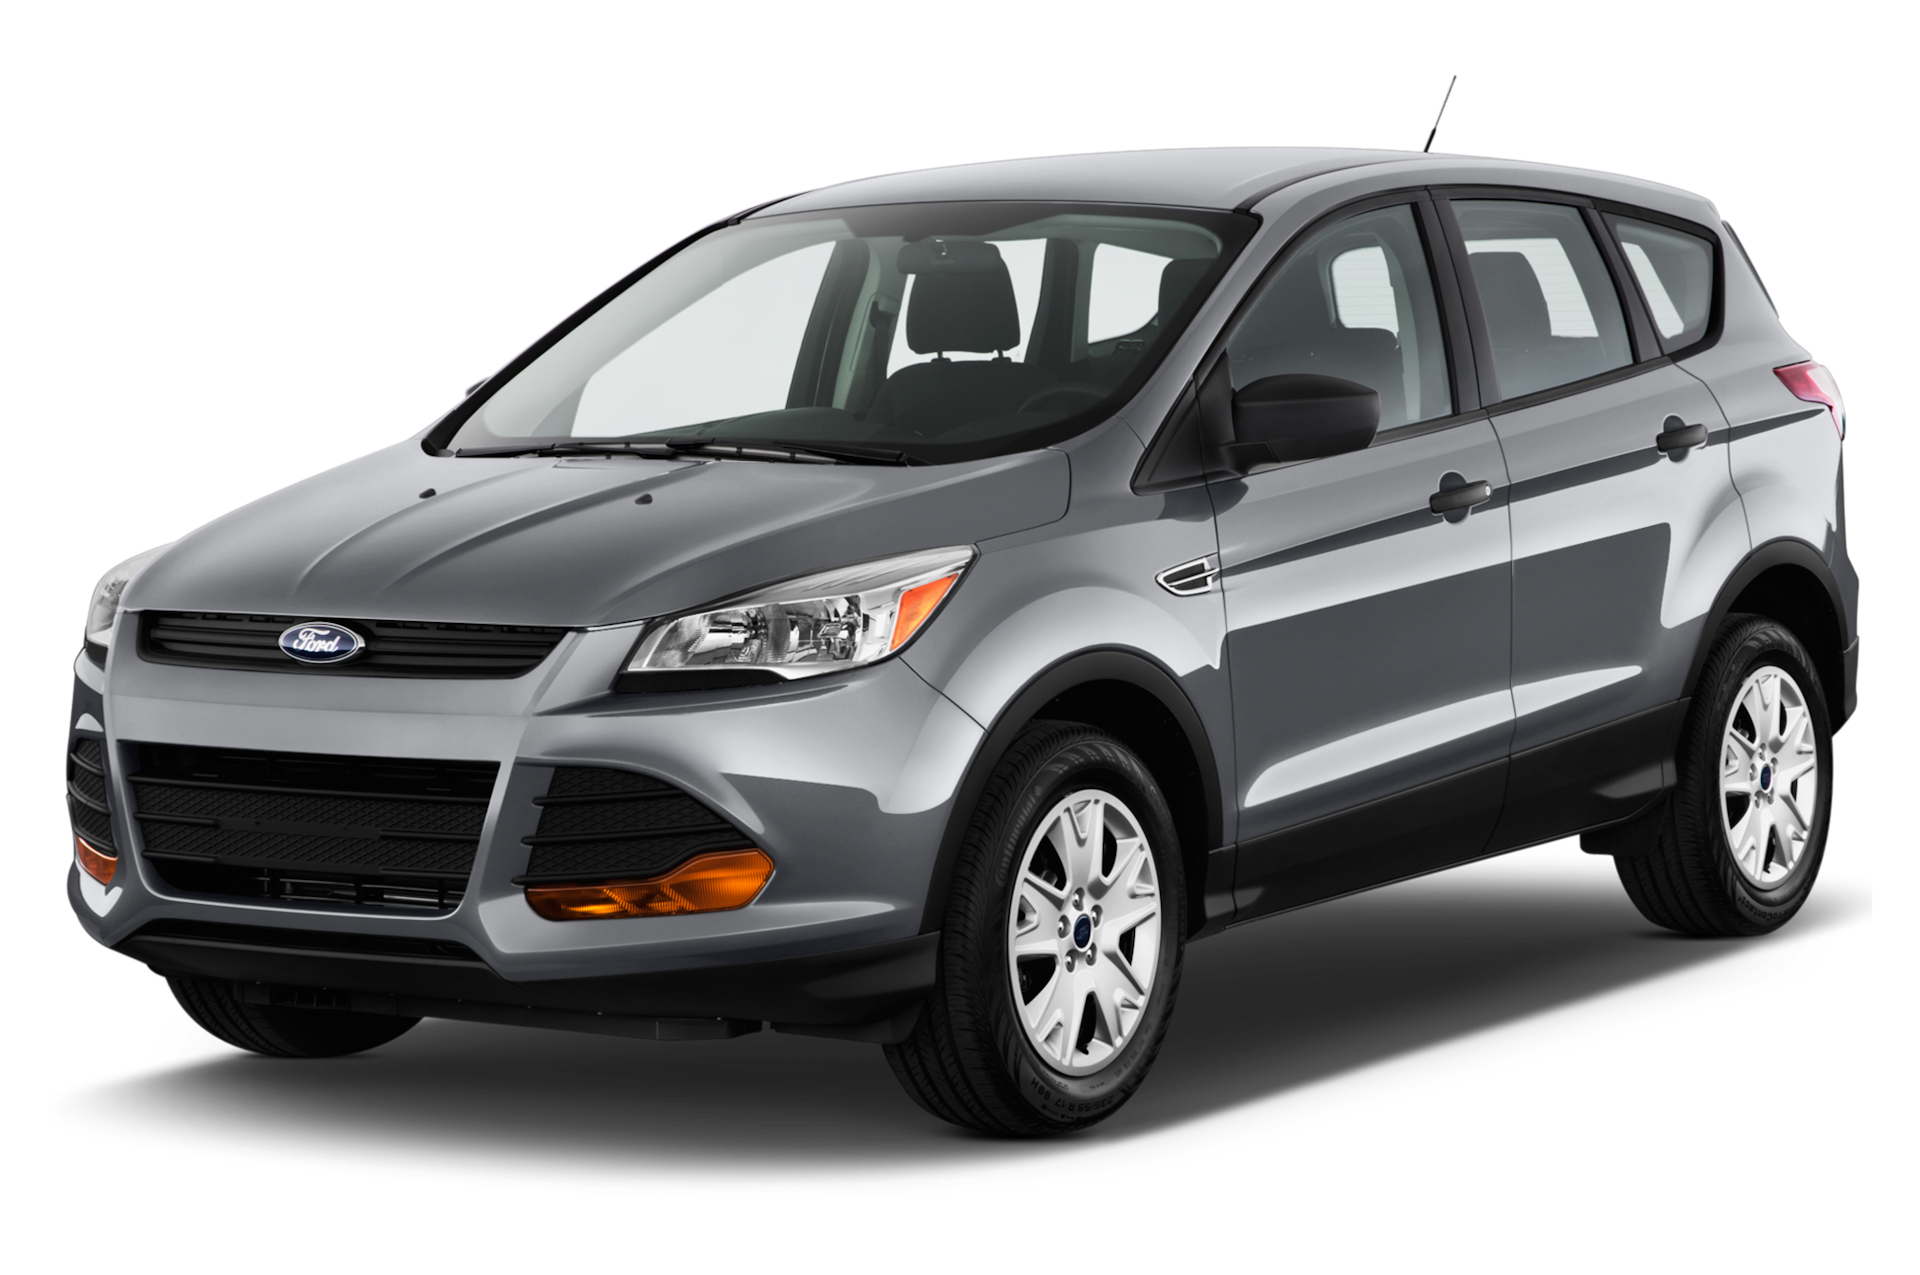 2014 Ford Escape Prices, Reviews, and Photos - MotorTrend